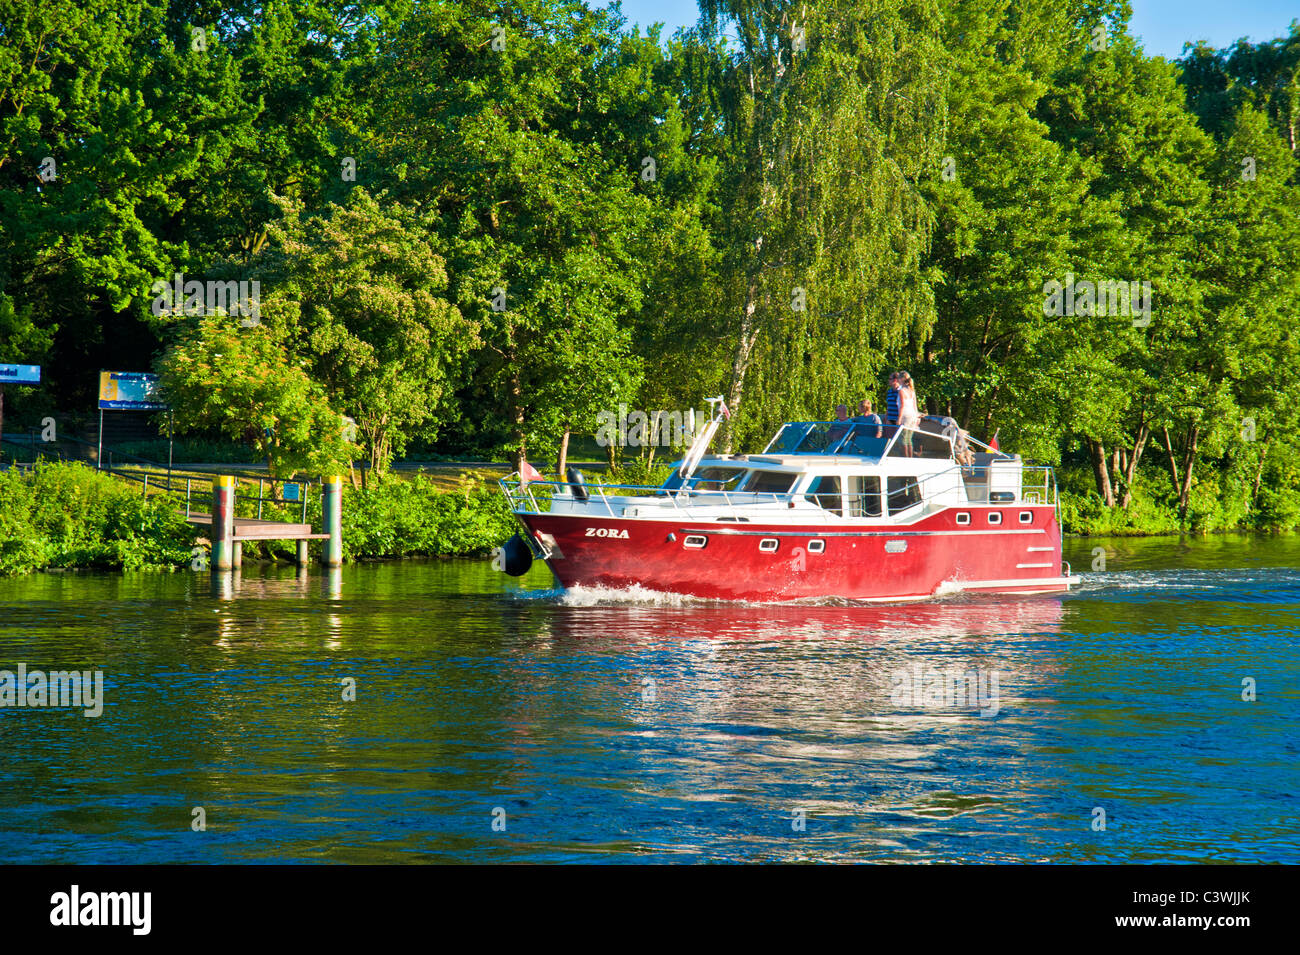 Yacht with red hull on River Spree, Berlin, Germany Stock Photo